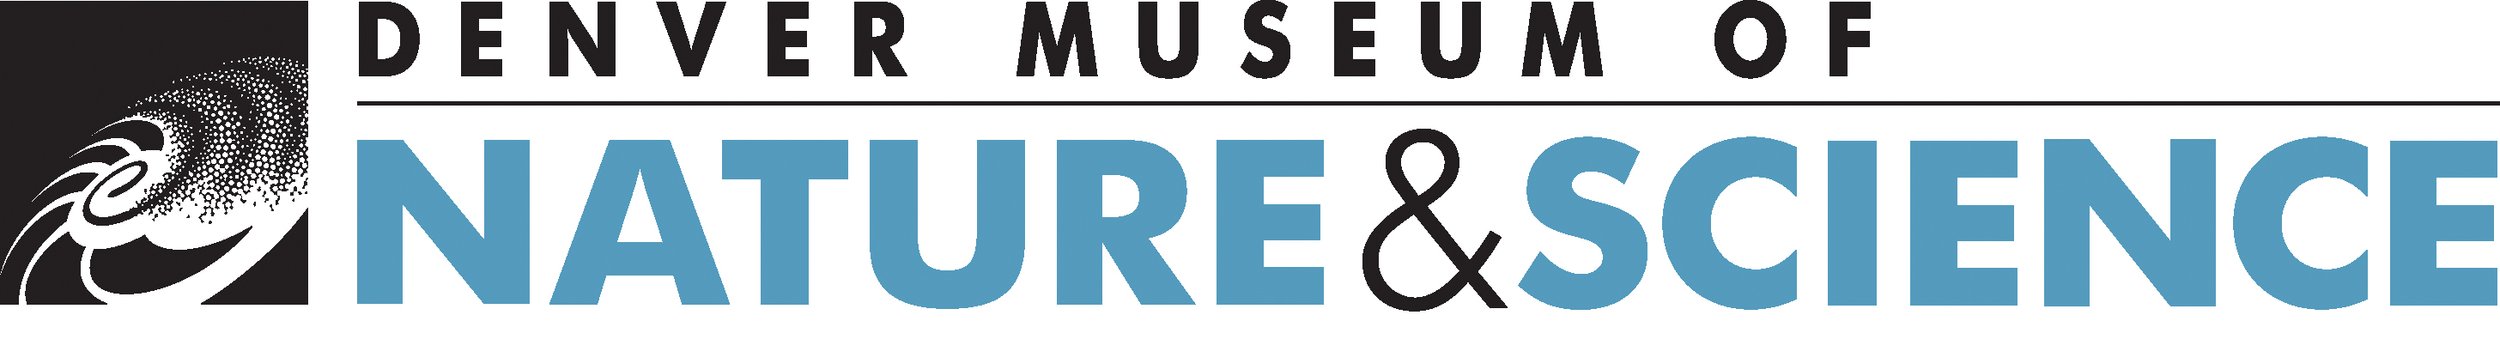 Denver Museum of Nature and Science Logo.jpeg